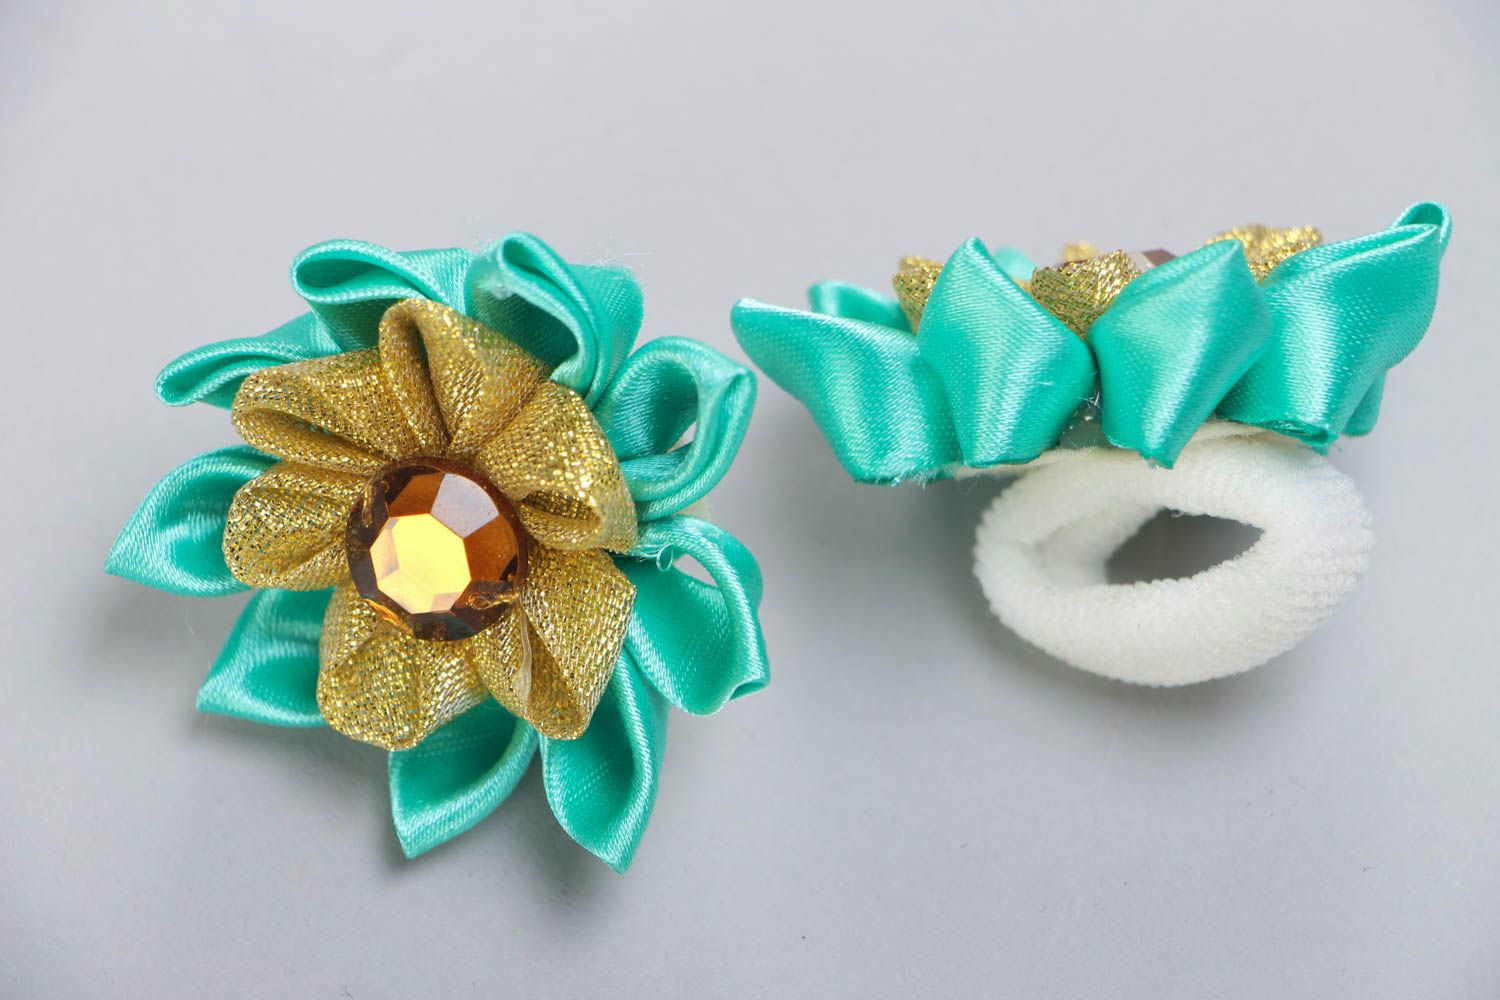 Handmade decorative hair ties with colorful kanzashi flowers set of 2 items photo 3